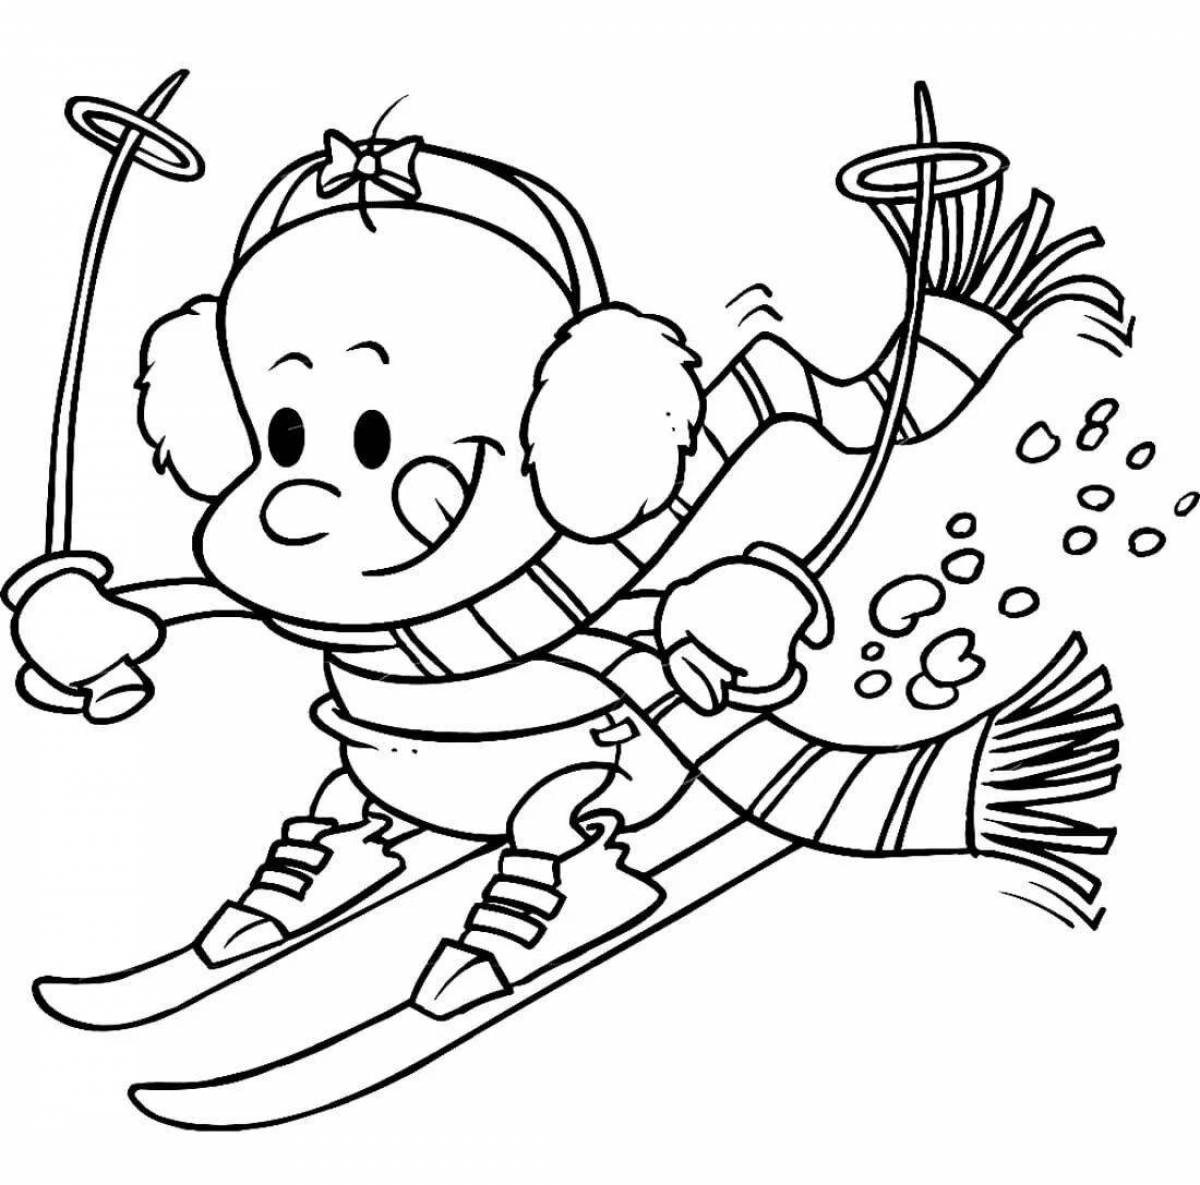 Coloring book joyful skier for children 4-5 years old